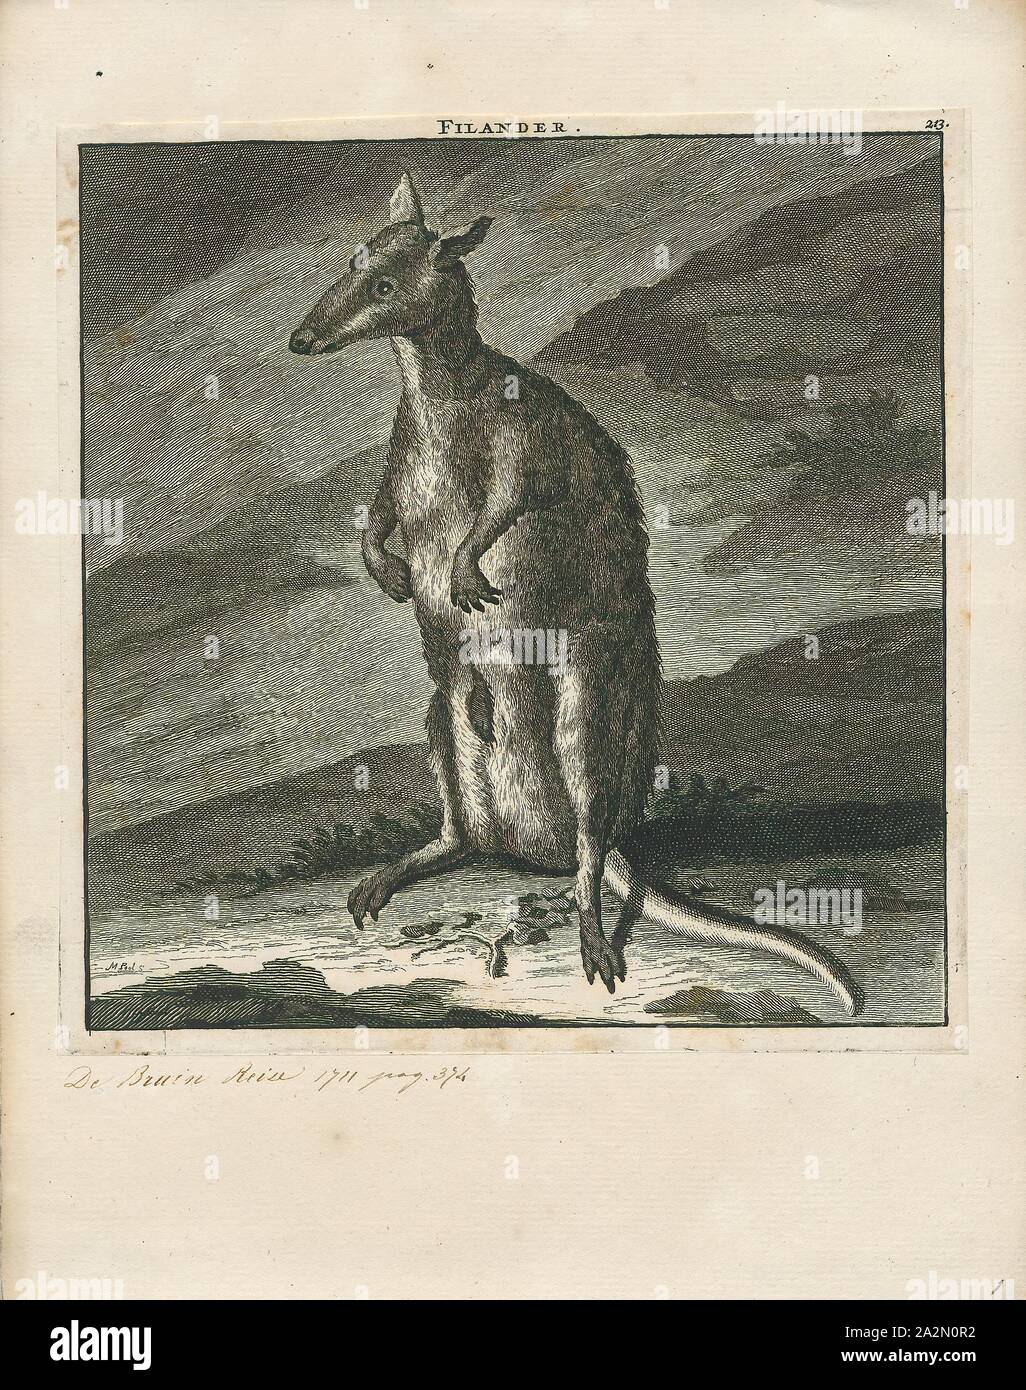 Macropus giganteus, Print, The eastern grey kangaroo (Macropus giganteus) is a marsupial found in southern and eastern Australia, with a population of several million. It is also known as the great grey kangaroo and the forester kangaroo. Although a big eastern grey male typically masses around 66 kg (weight 145 lb.) and stands almost 2 m (6.6 ft.) tall, the scientific name, Macropus giganteus (gigantic large-foot), is misleading: the red kangaroo of the semi-arid inland is larger, weighing up to 90 kg., 1700-1880 Stock Photo